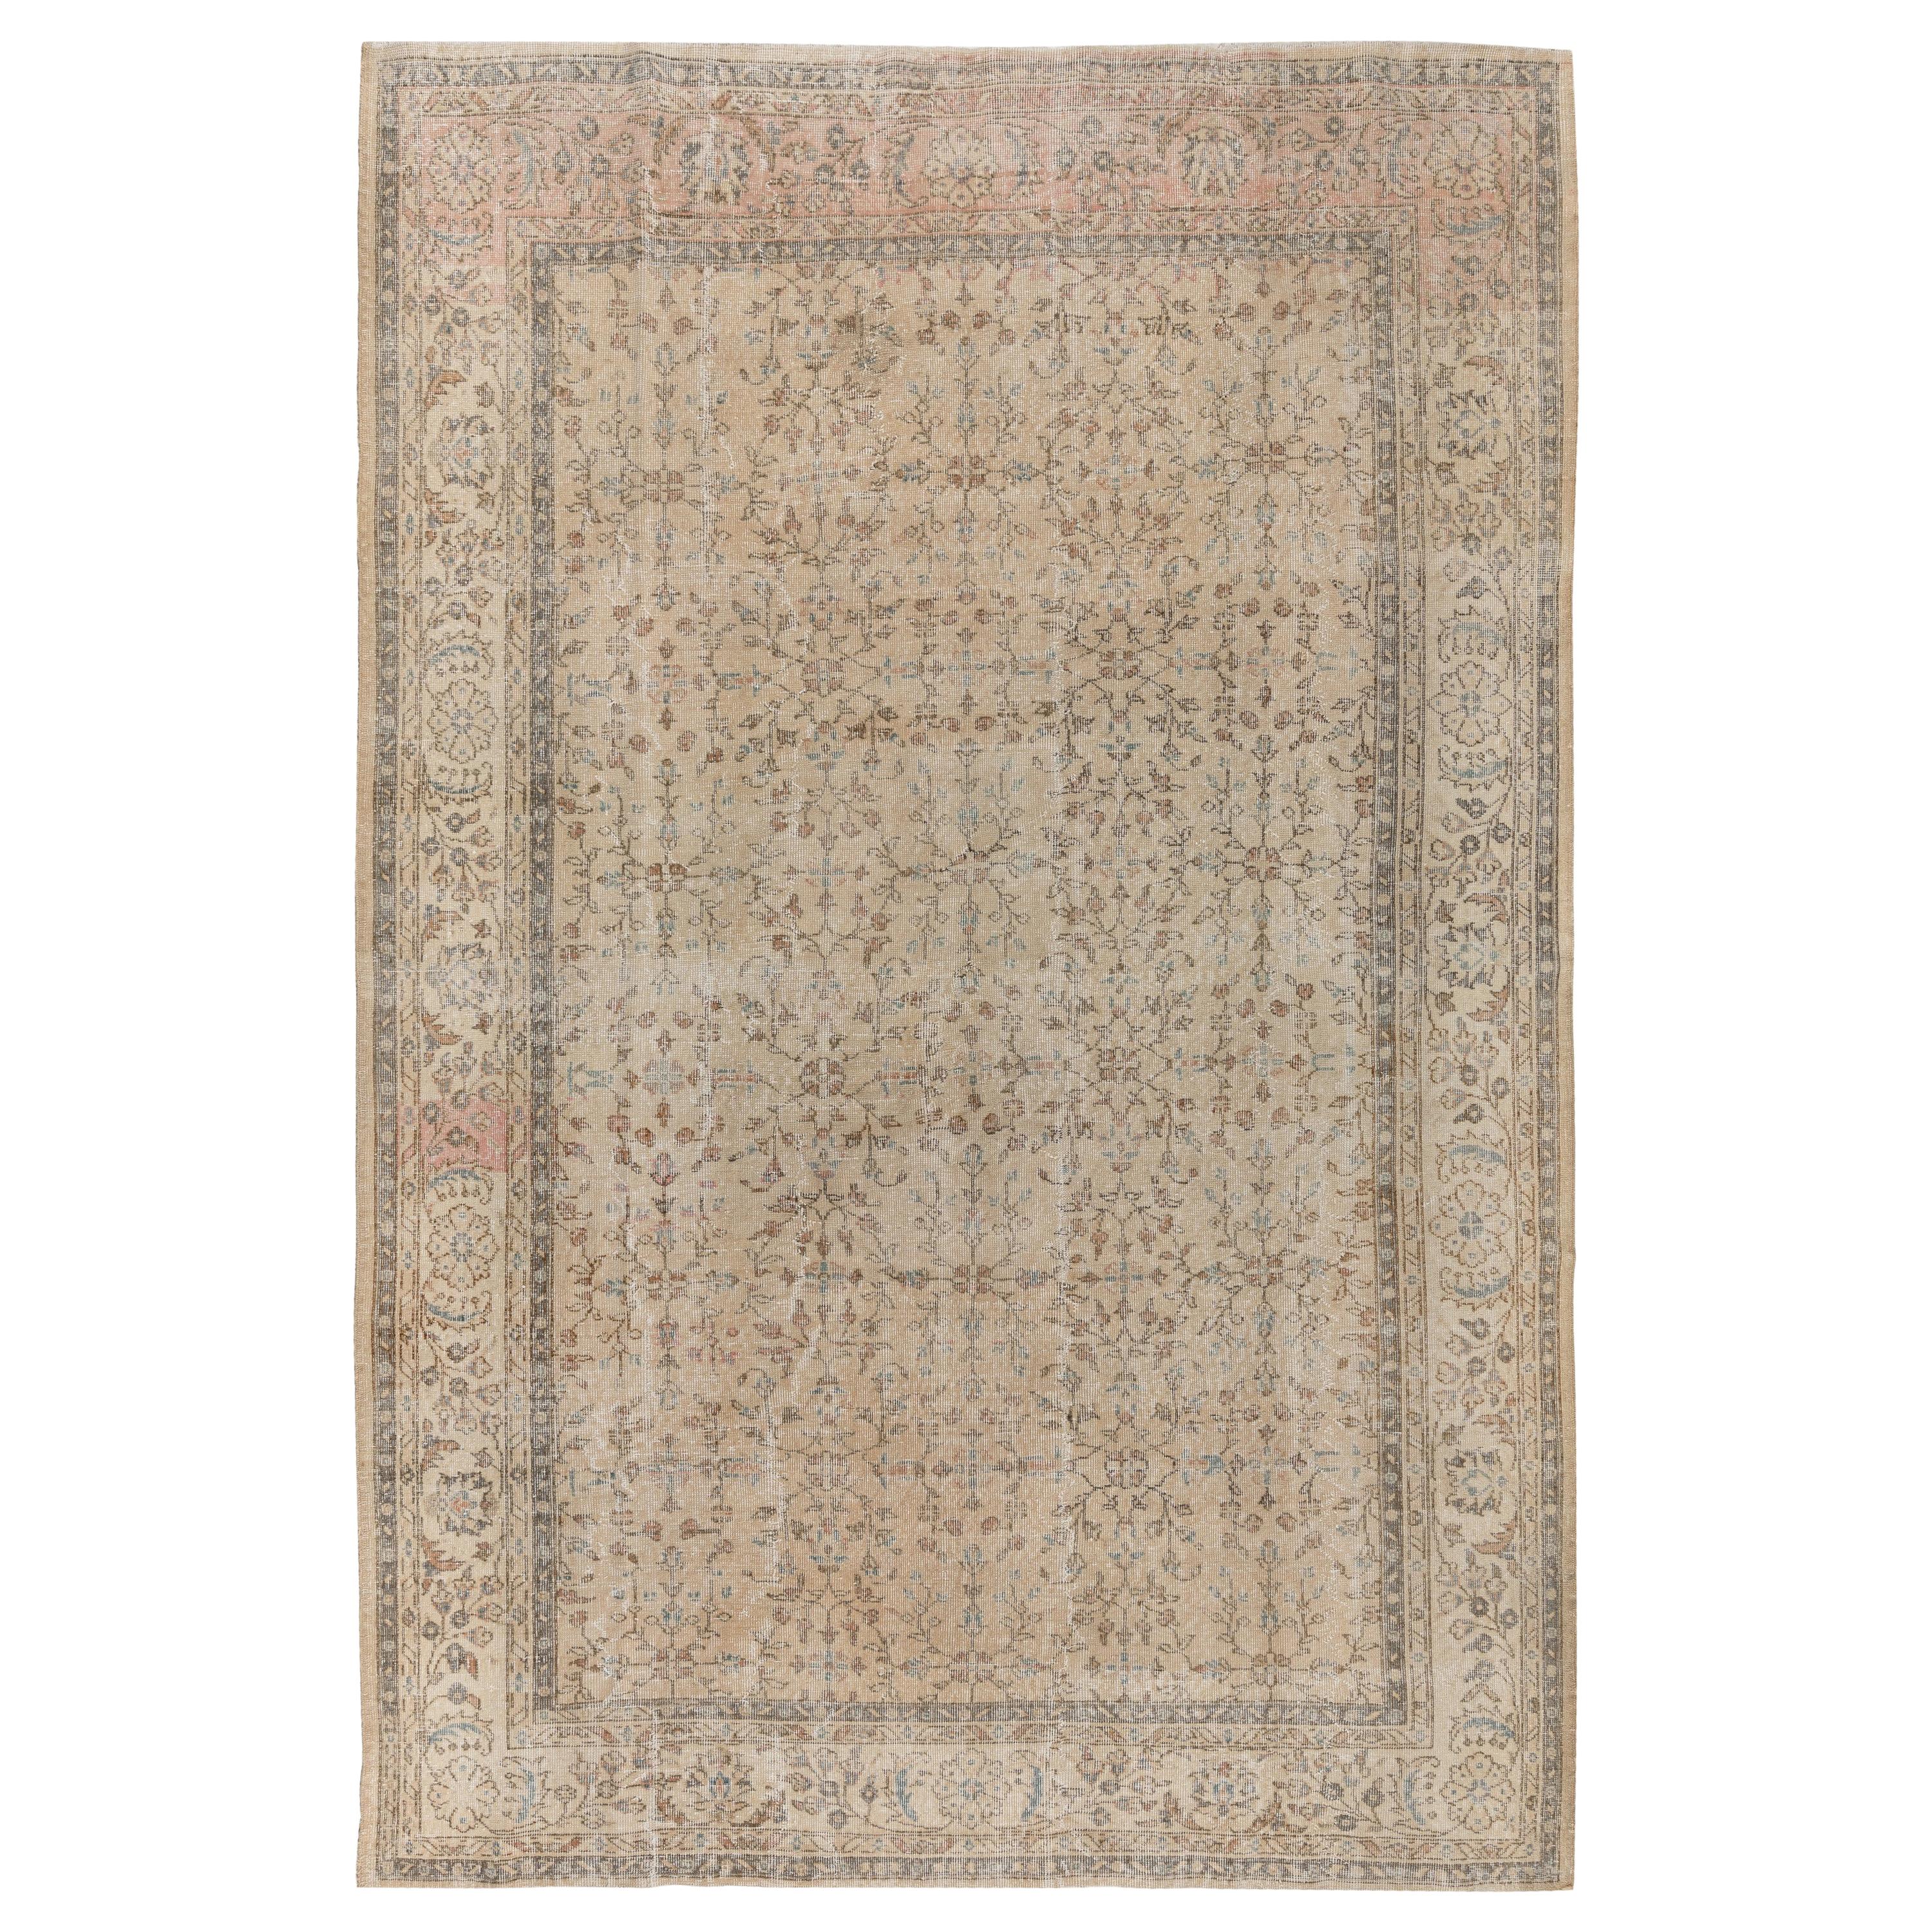 7.4x10.4 Ft Handmade Vintage Floral Turkish Area Rug in Muted, Earthy Colors. 